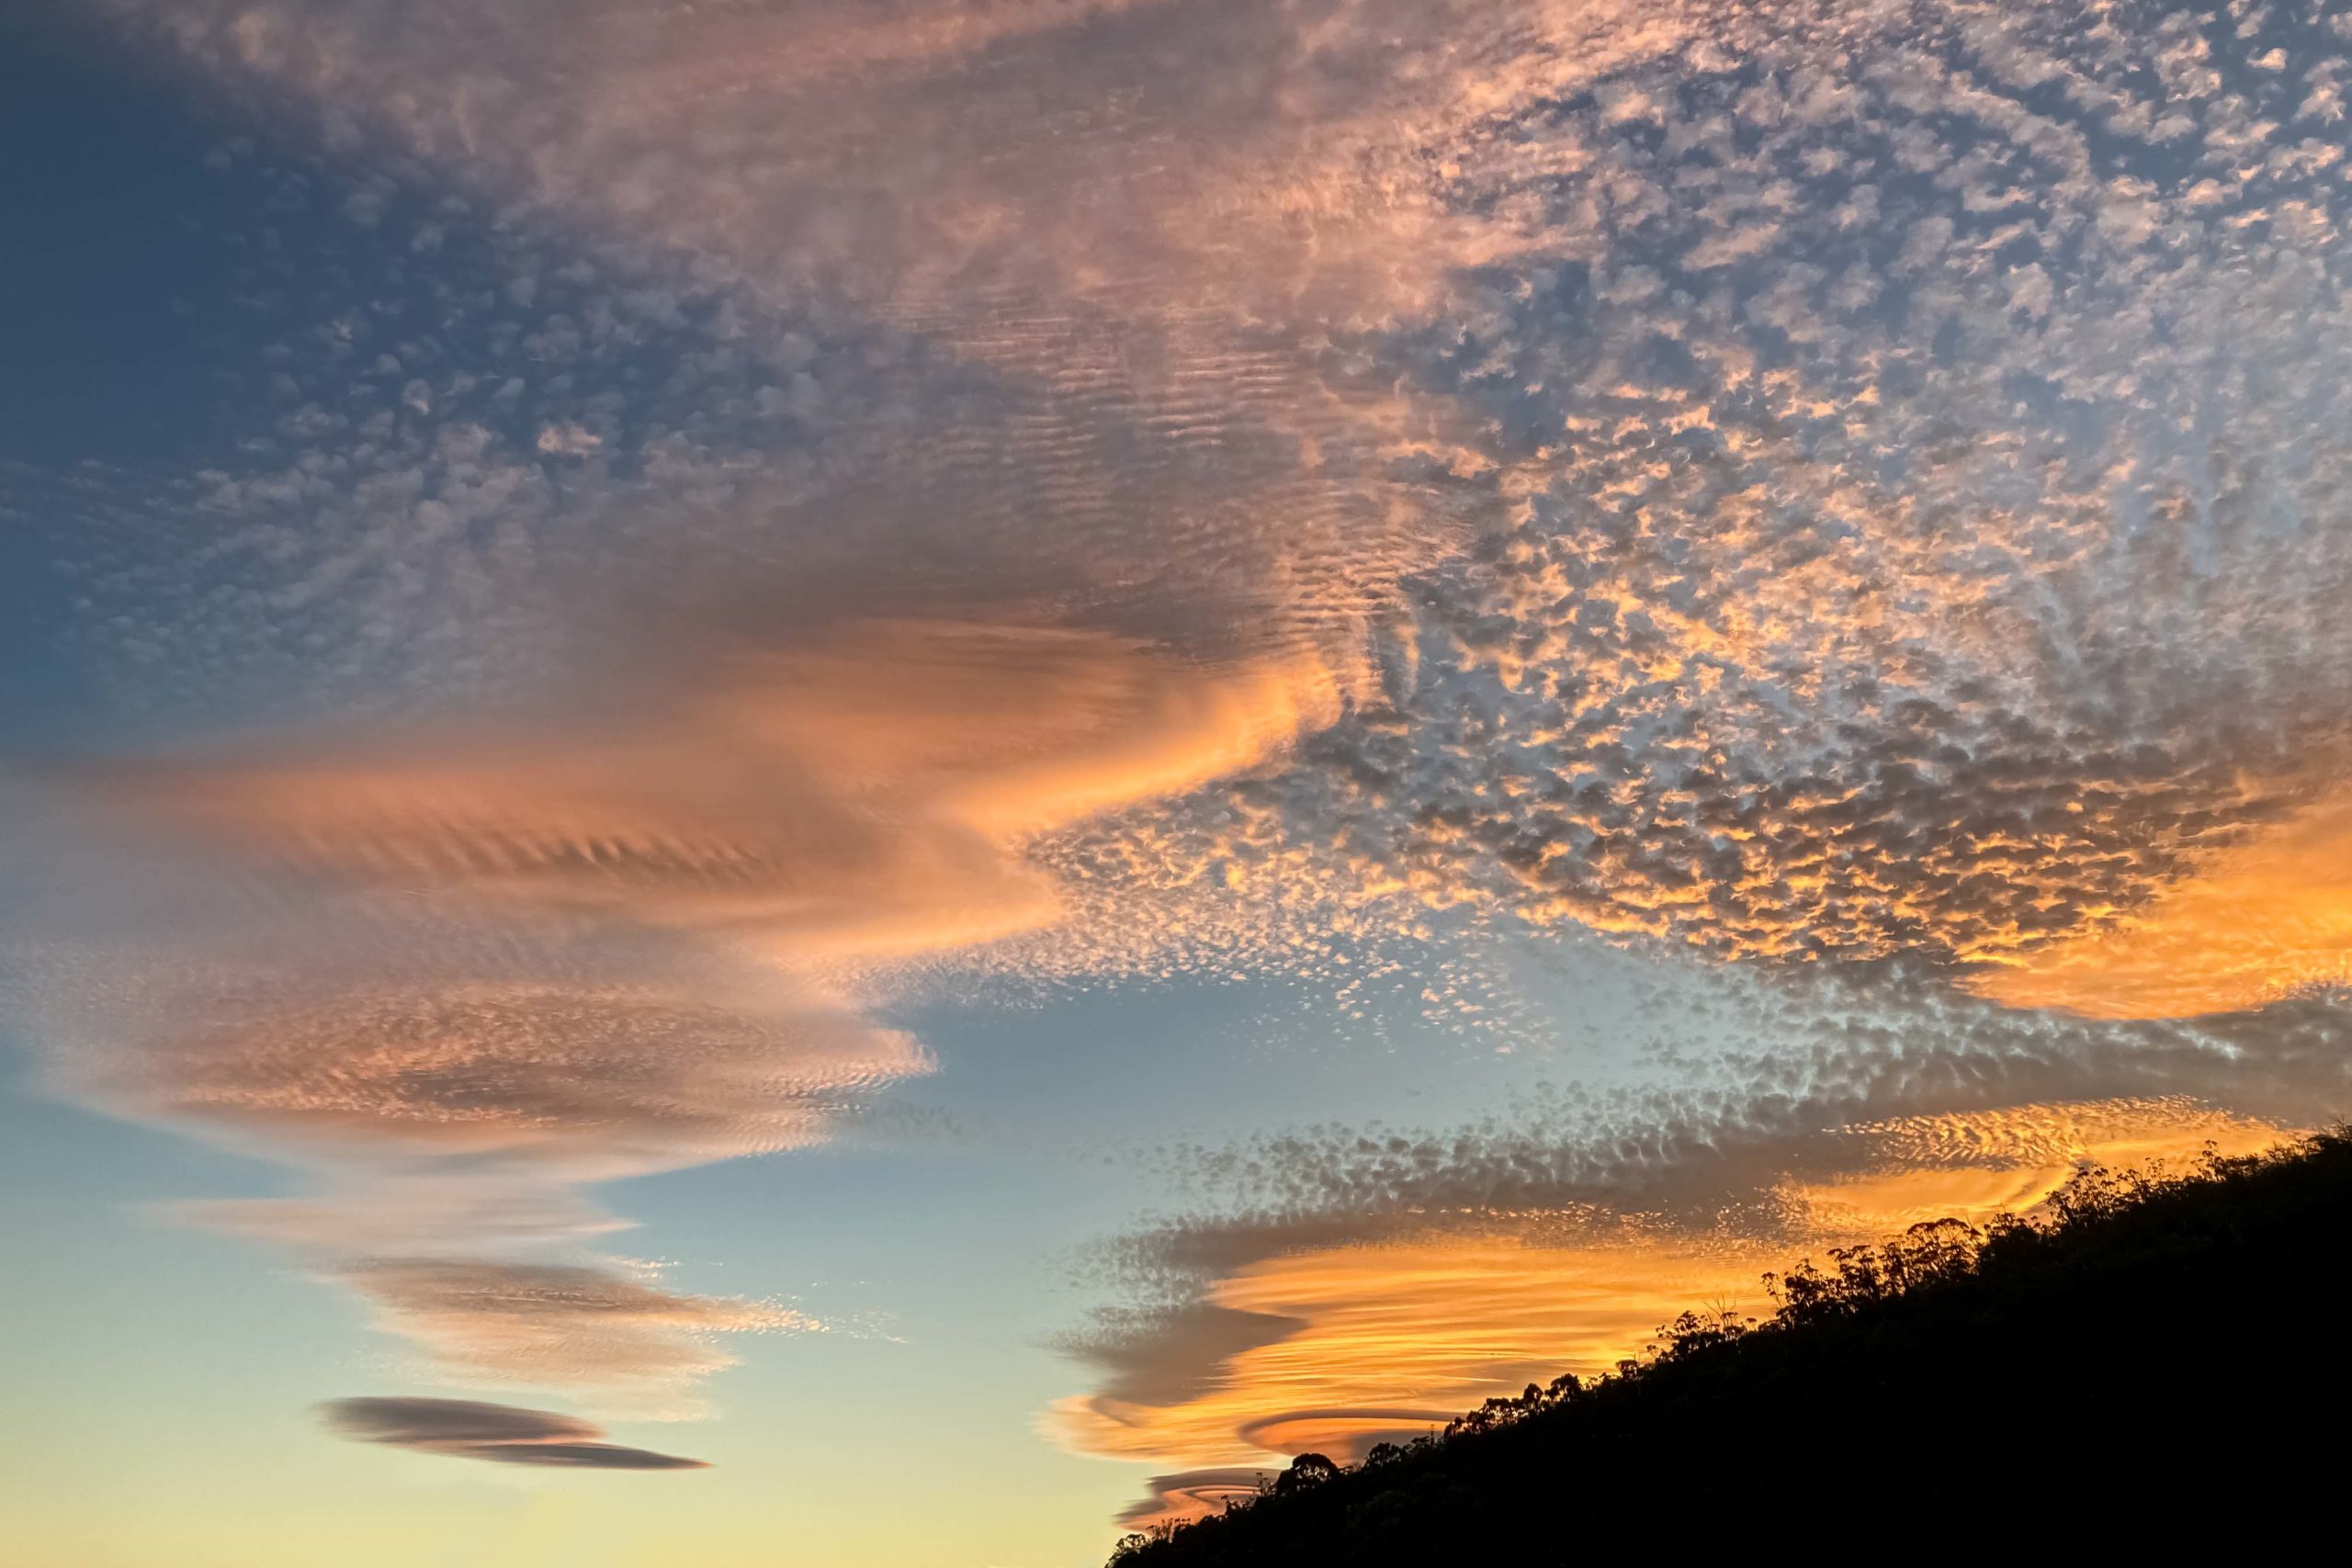 Pancake shaped clouds at sunset in formation over a tree-lined hill